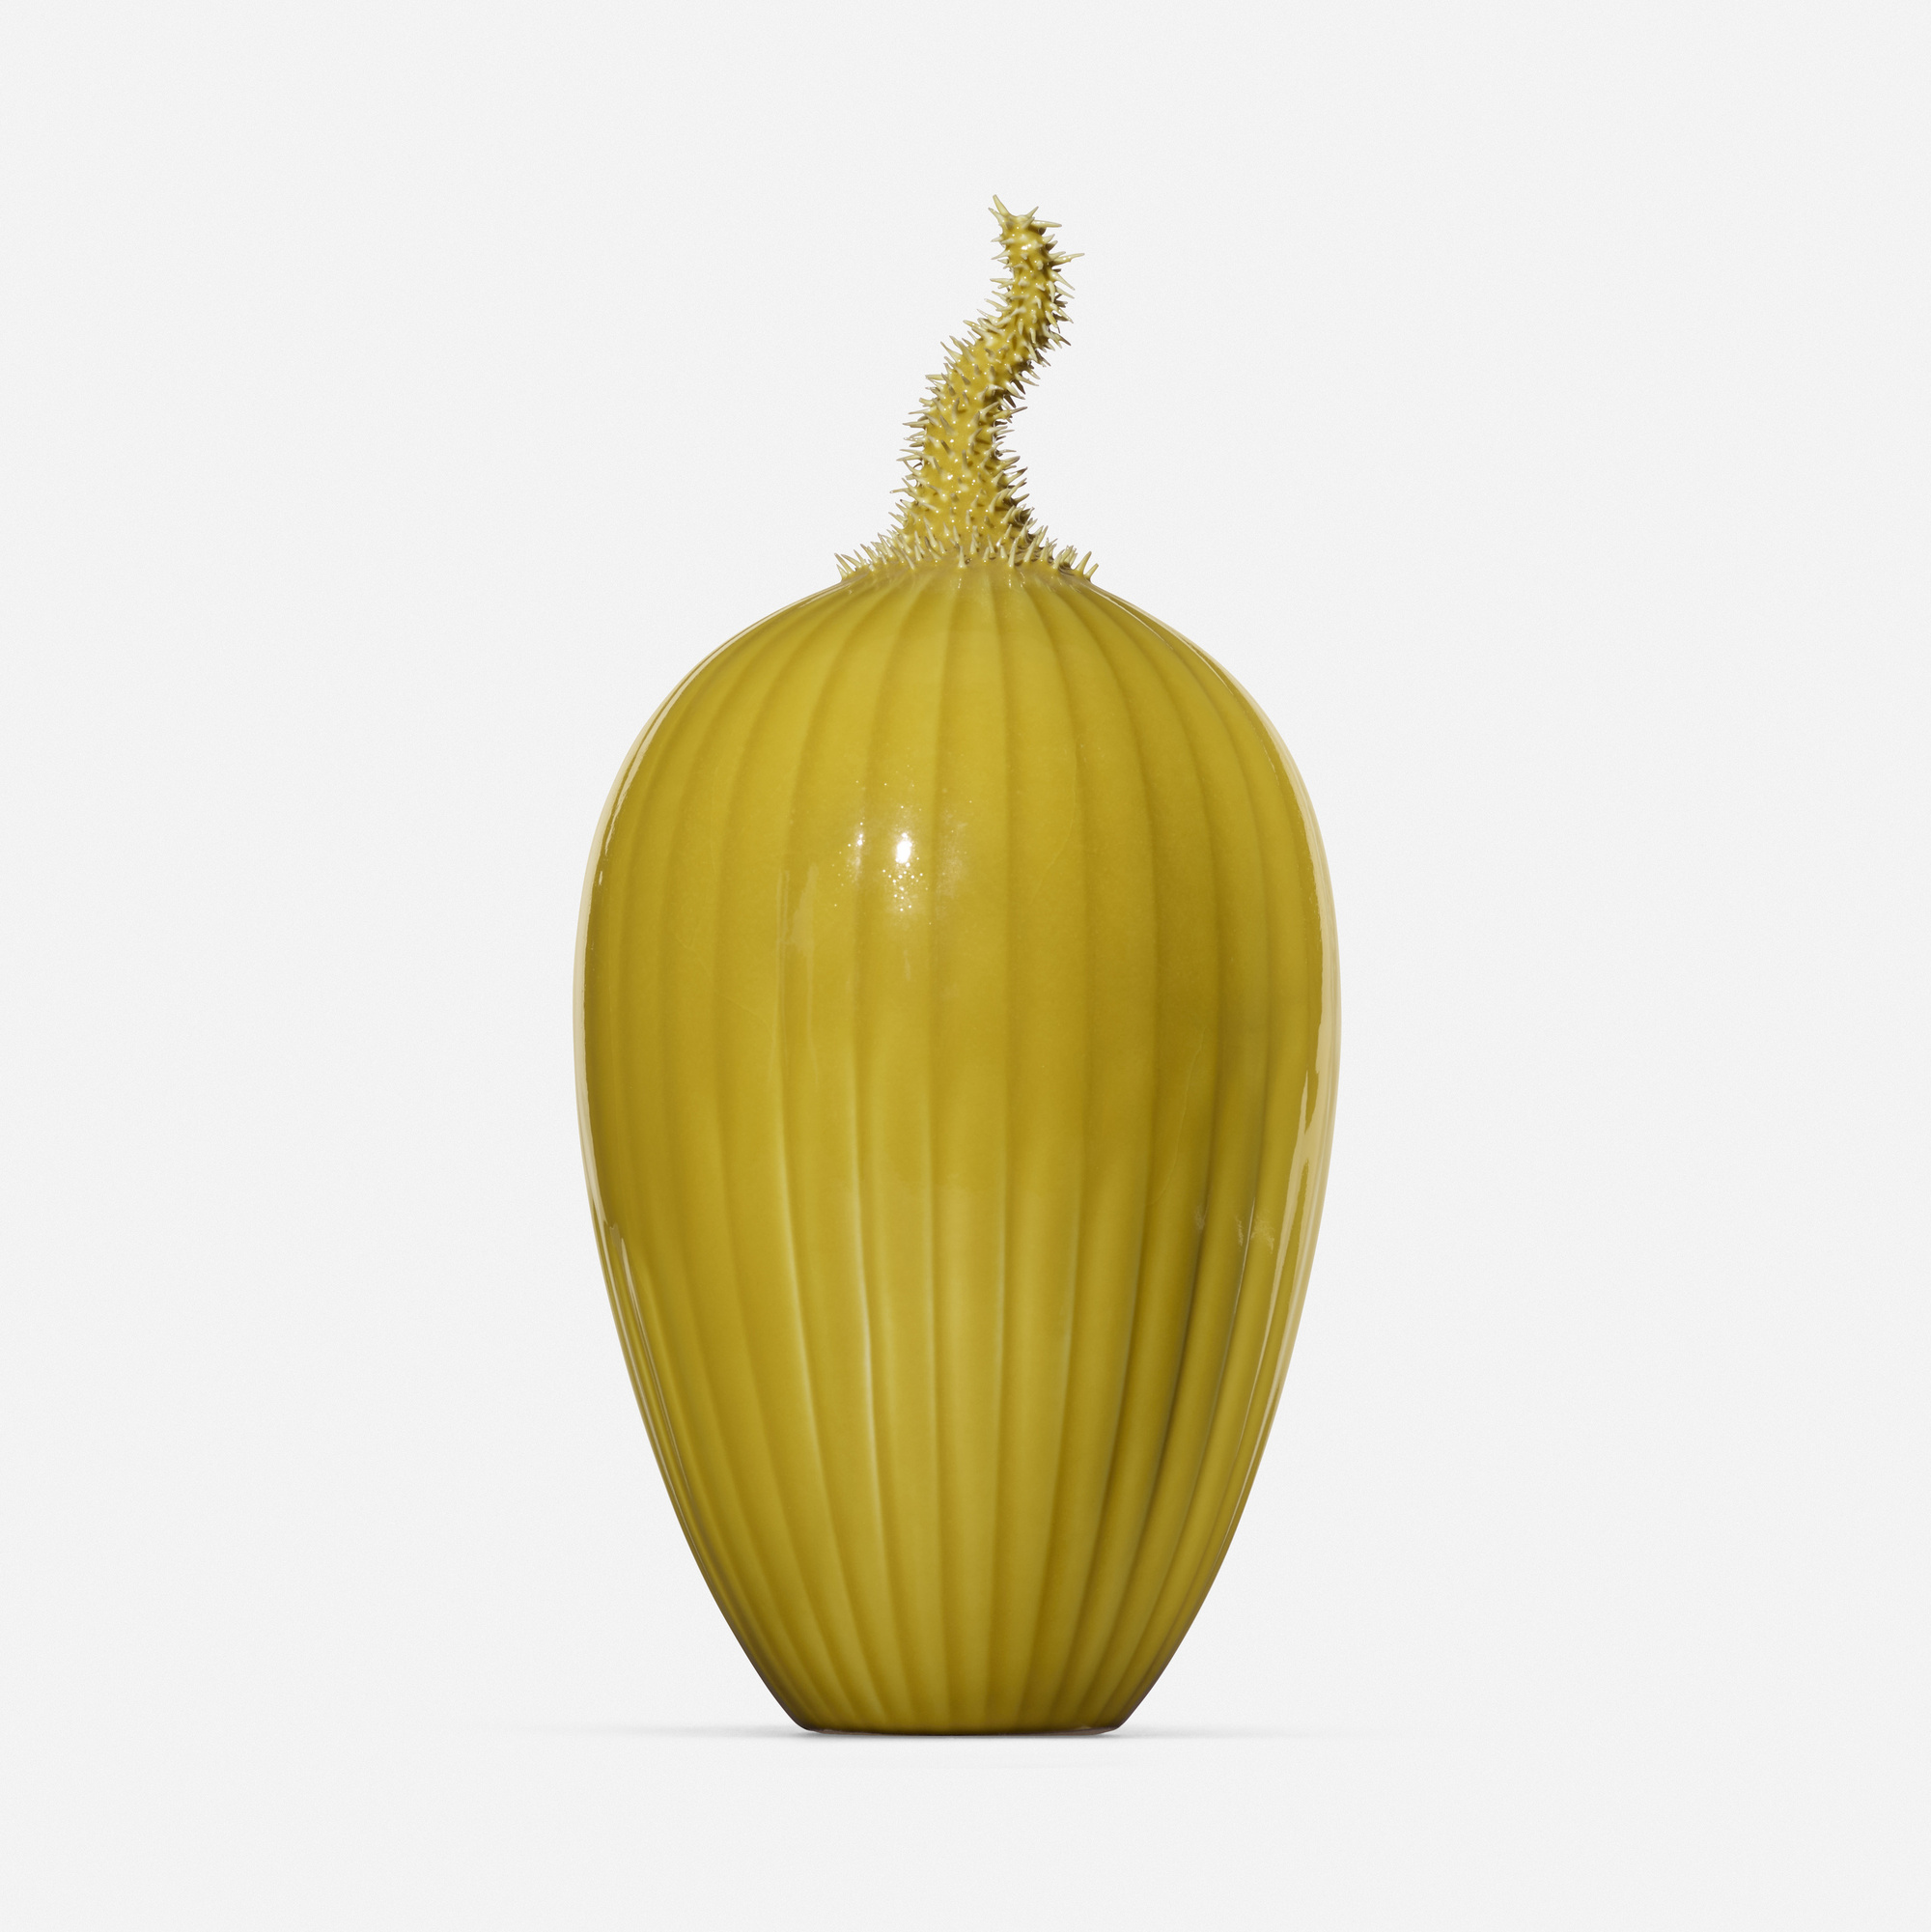 724: CLIFF LEE, Imperial Yellow Prickly Melon < Modern Design, 12 May 2023  < Auctions